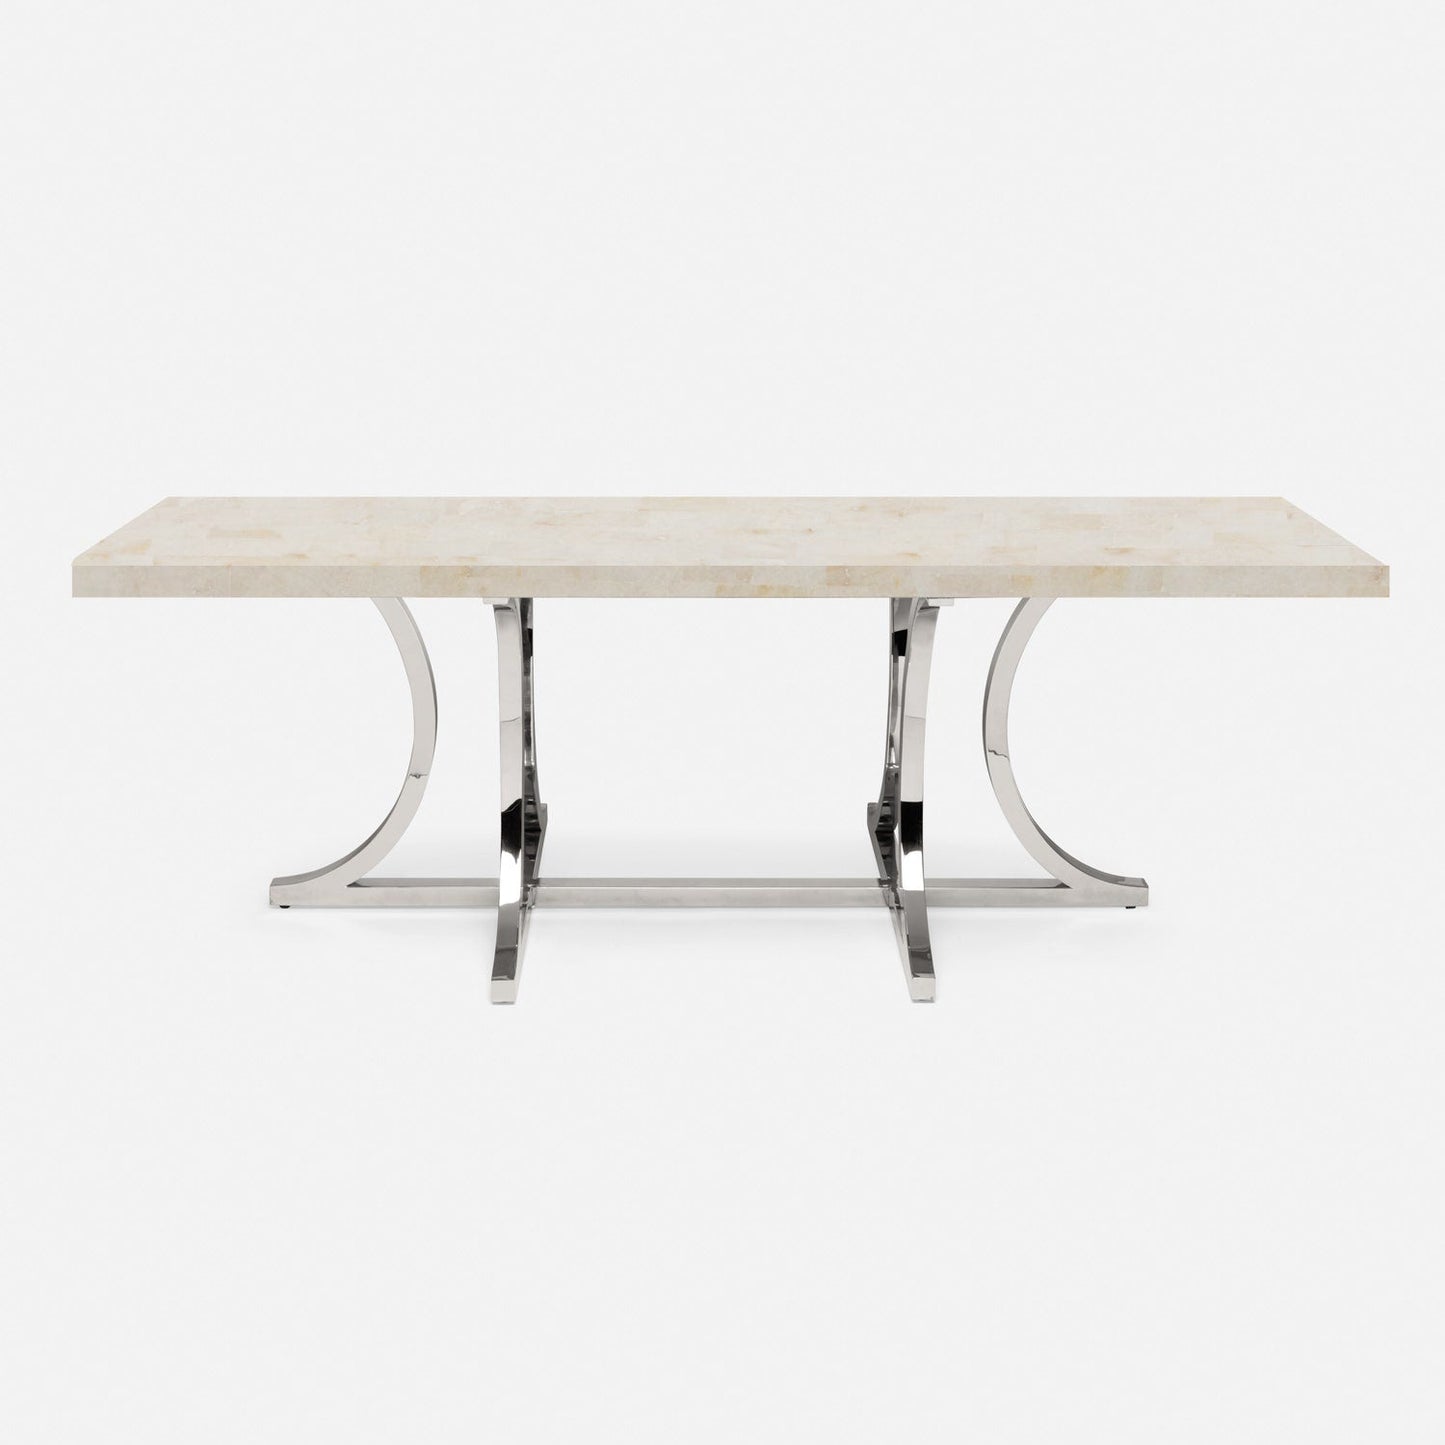 Made Goods Leighton 110" x 40" x 30" Polished Silver Steel Dinning Table With Rectangle Ice Crystal Stone Table Top